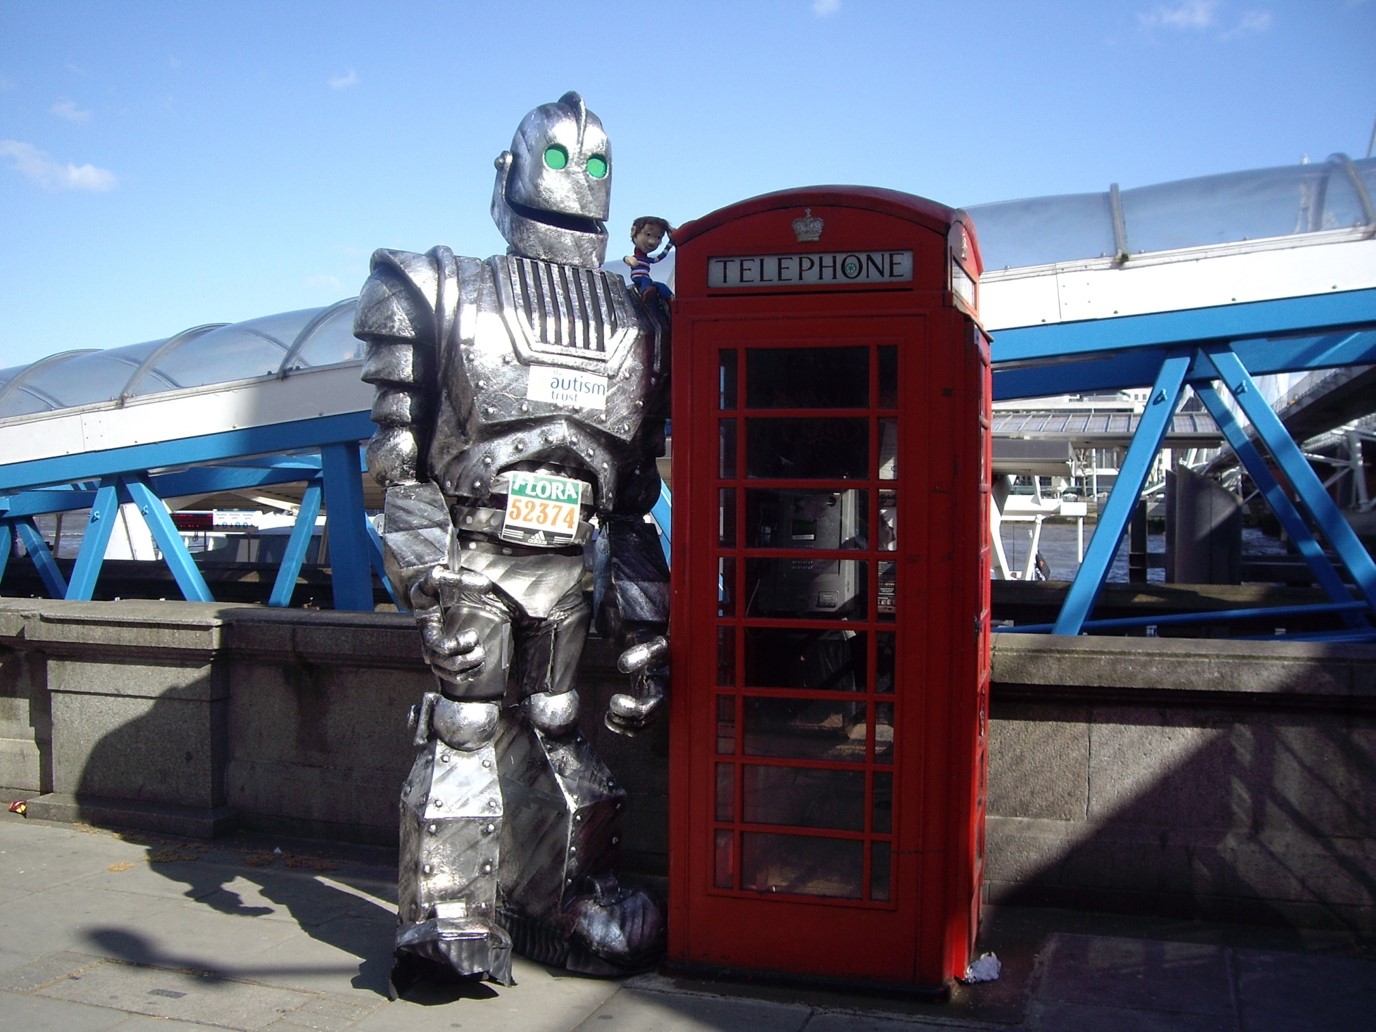 Man in tin suit standing next to a phone booth